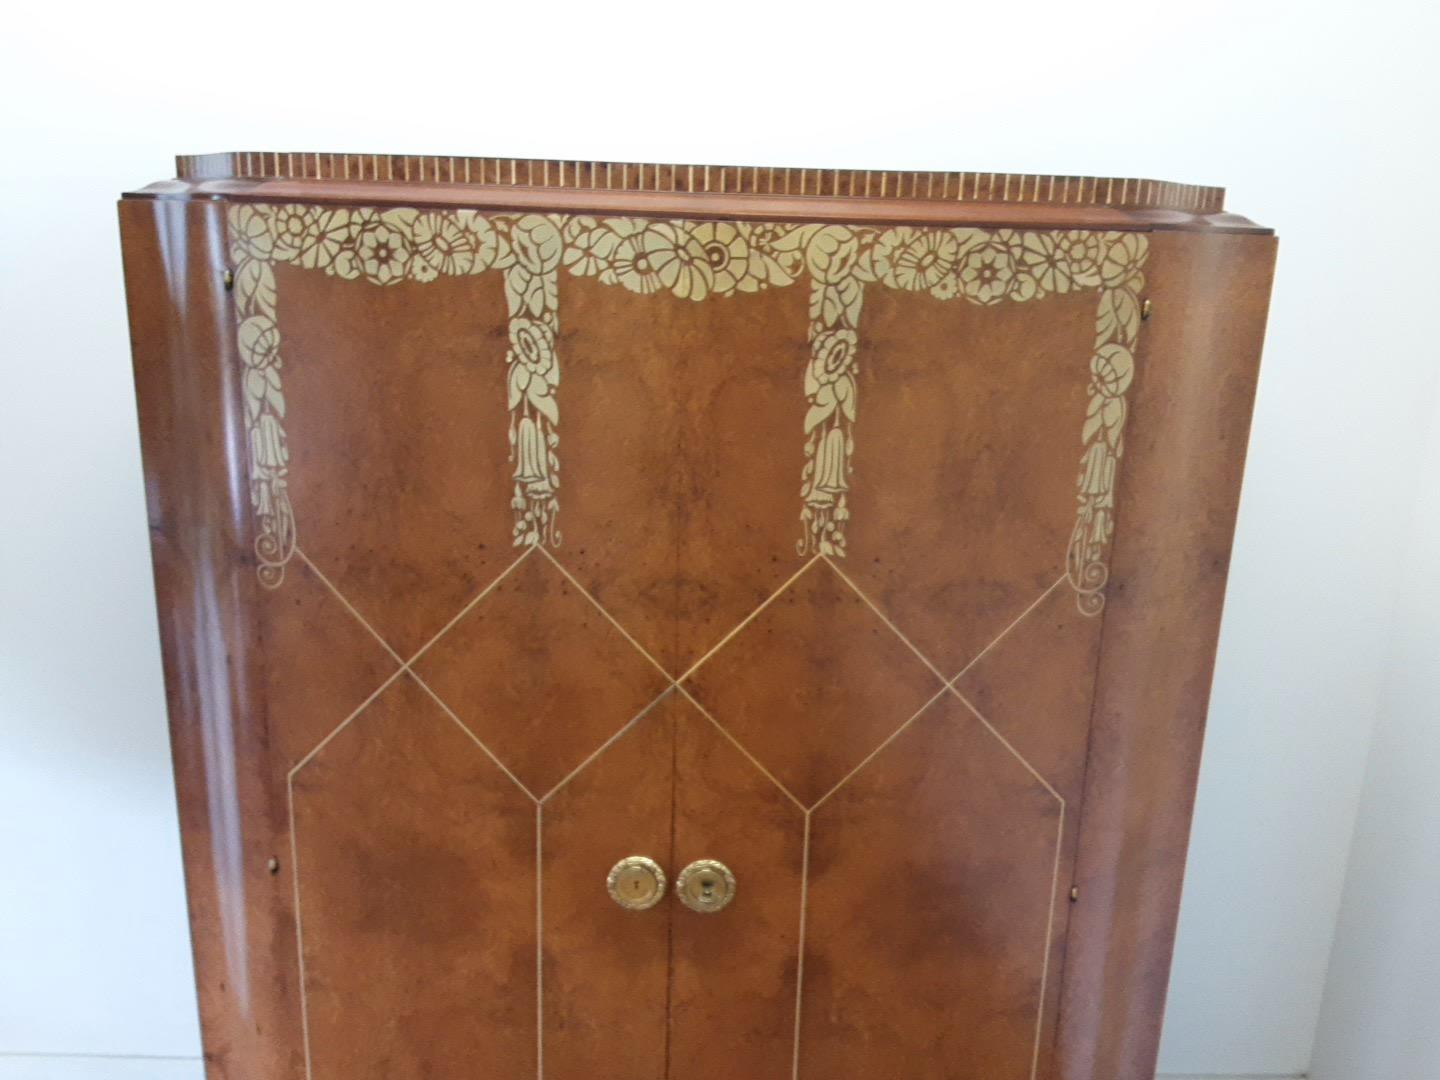 Art Deco Bedroom Suite by Mercier Freres in Satin Maple with Inlaid Floral Motif For Sale 6